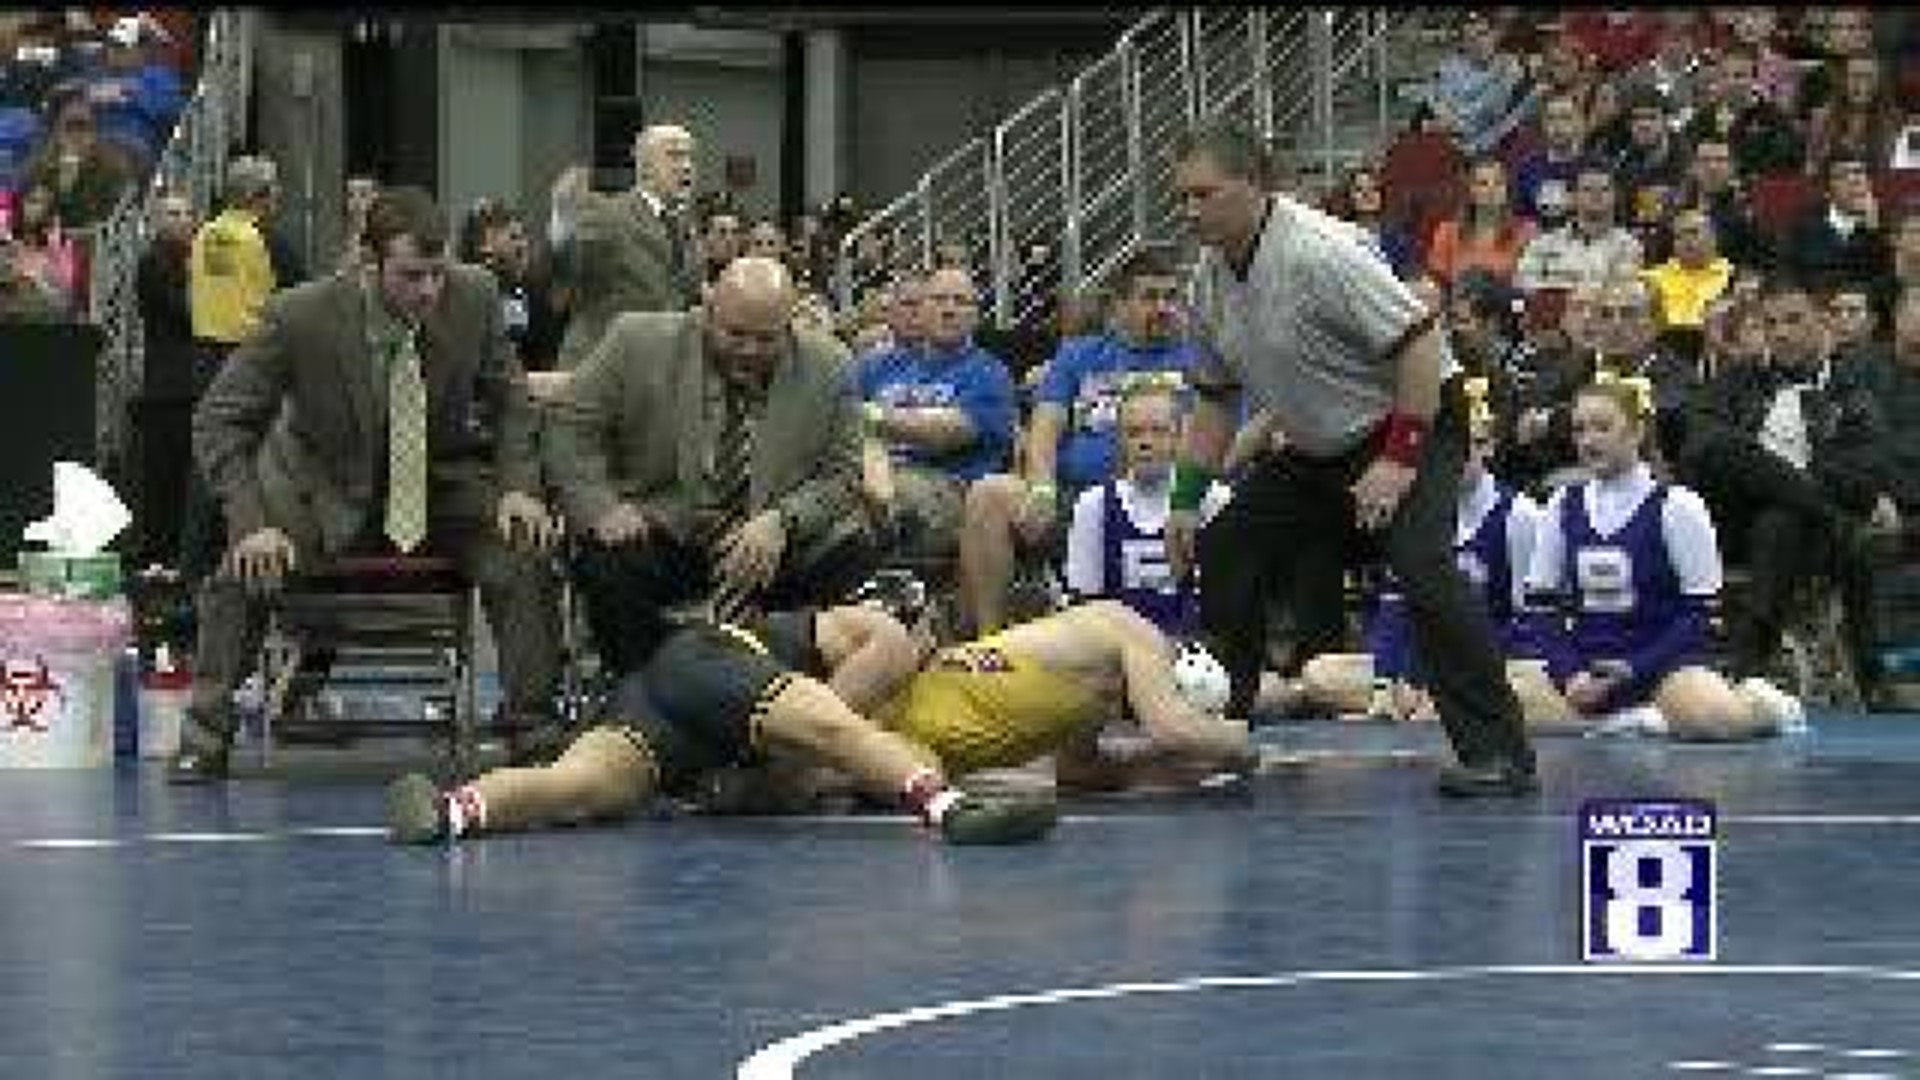 Bettendorf Shines on a Big Night in Des Moines